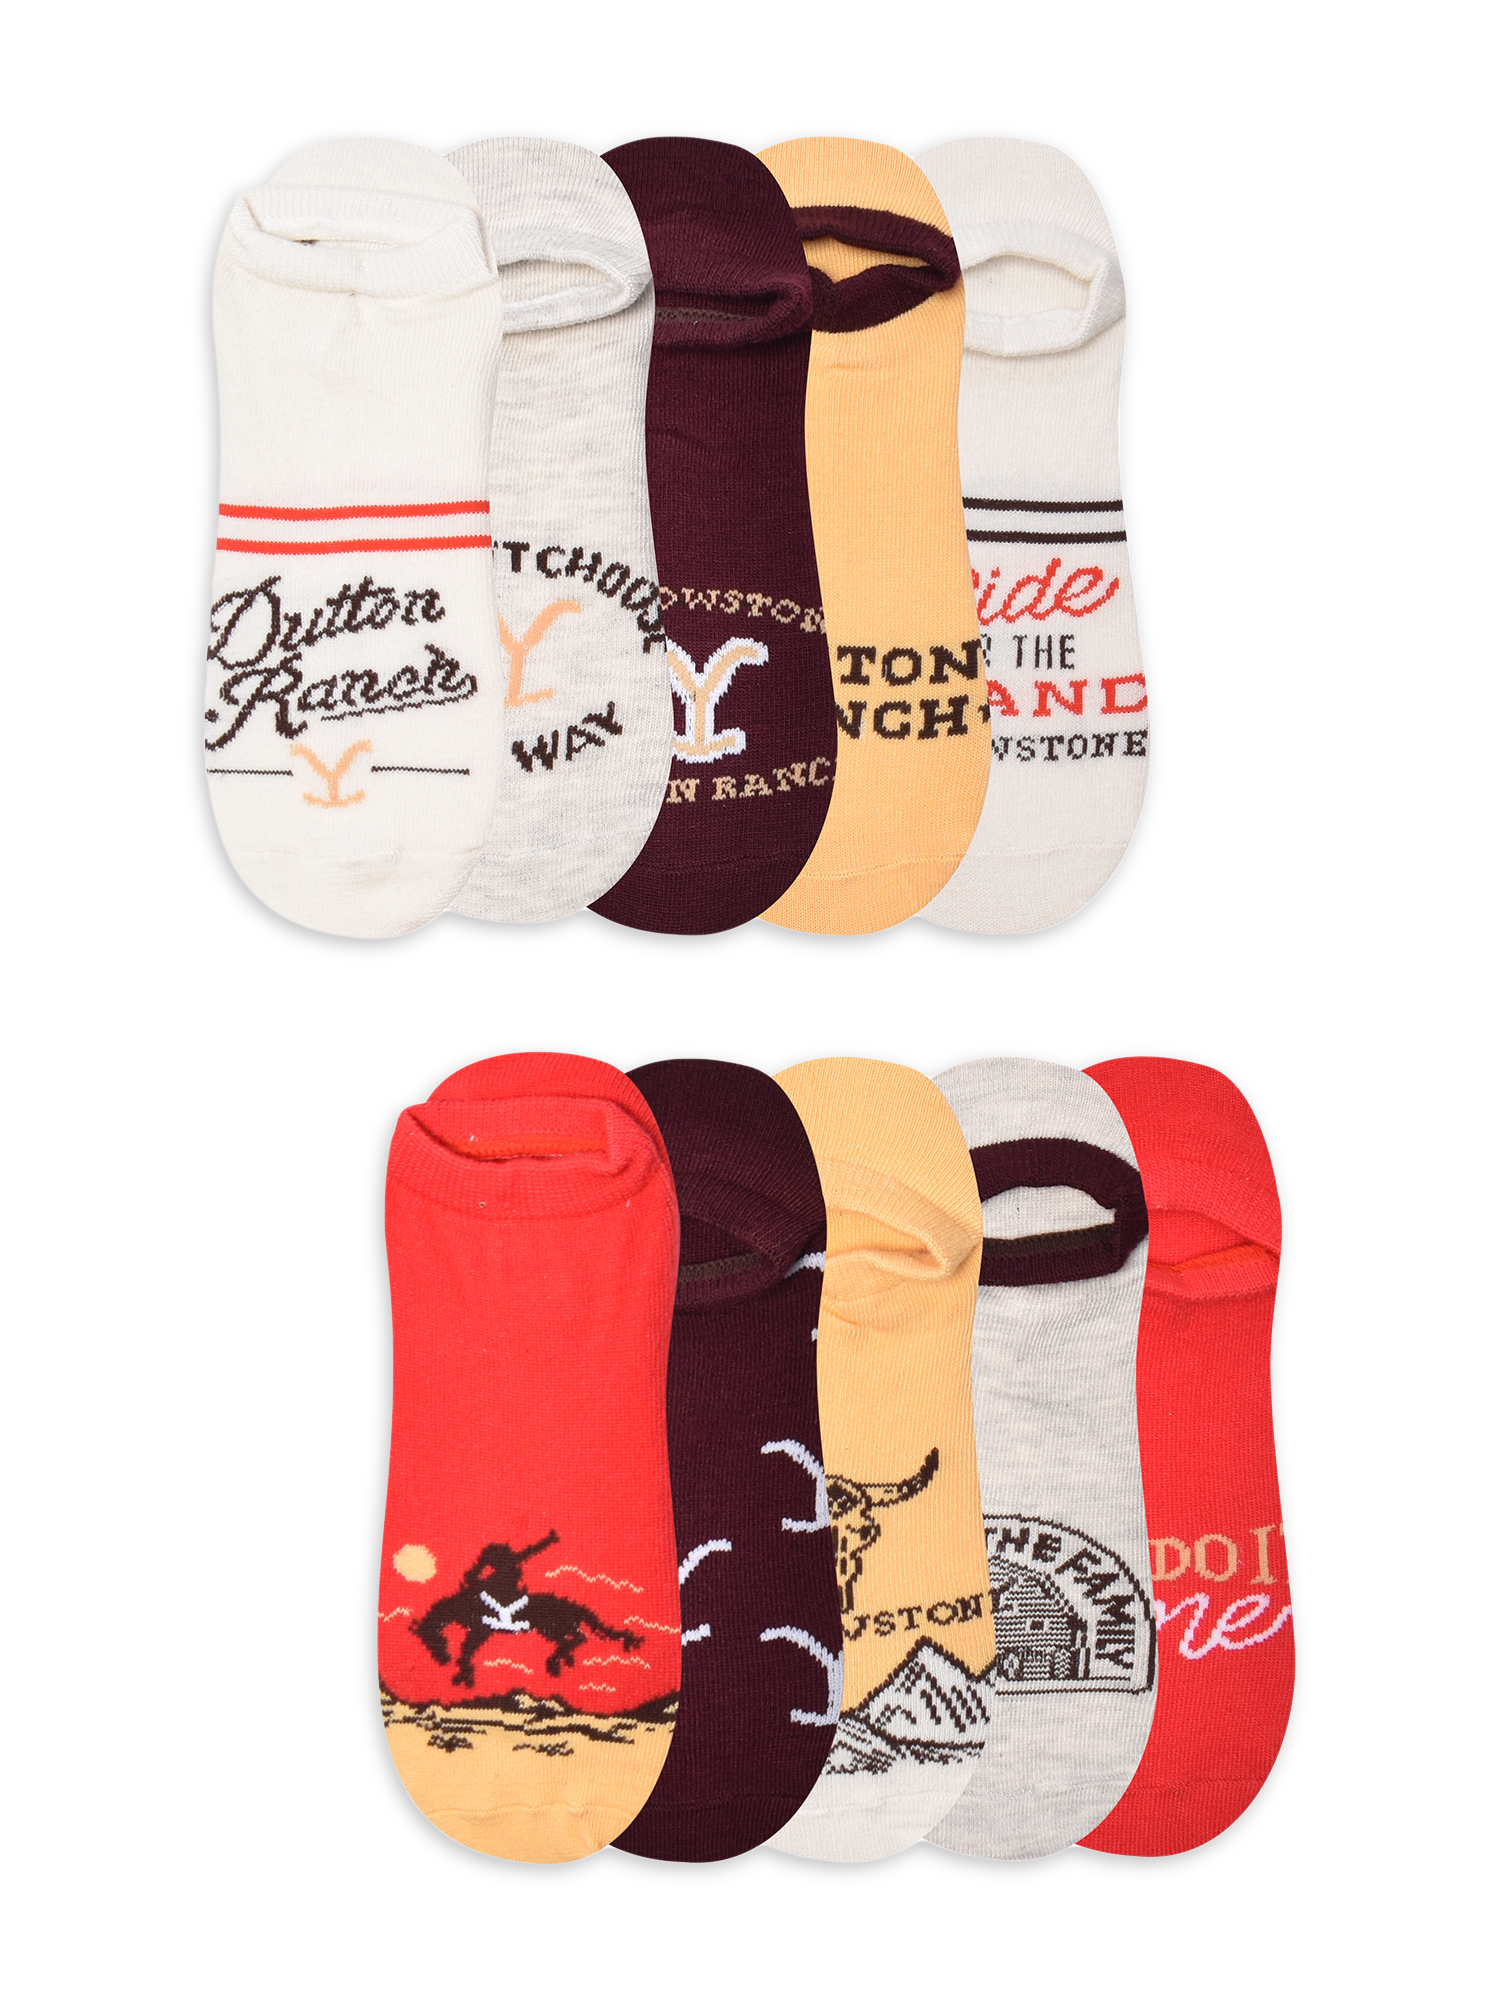 Yellowstone Womens Graphic Super No Show Socks, 10-Pack, Sizes 4-10 - image 1 of 5